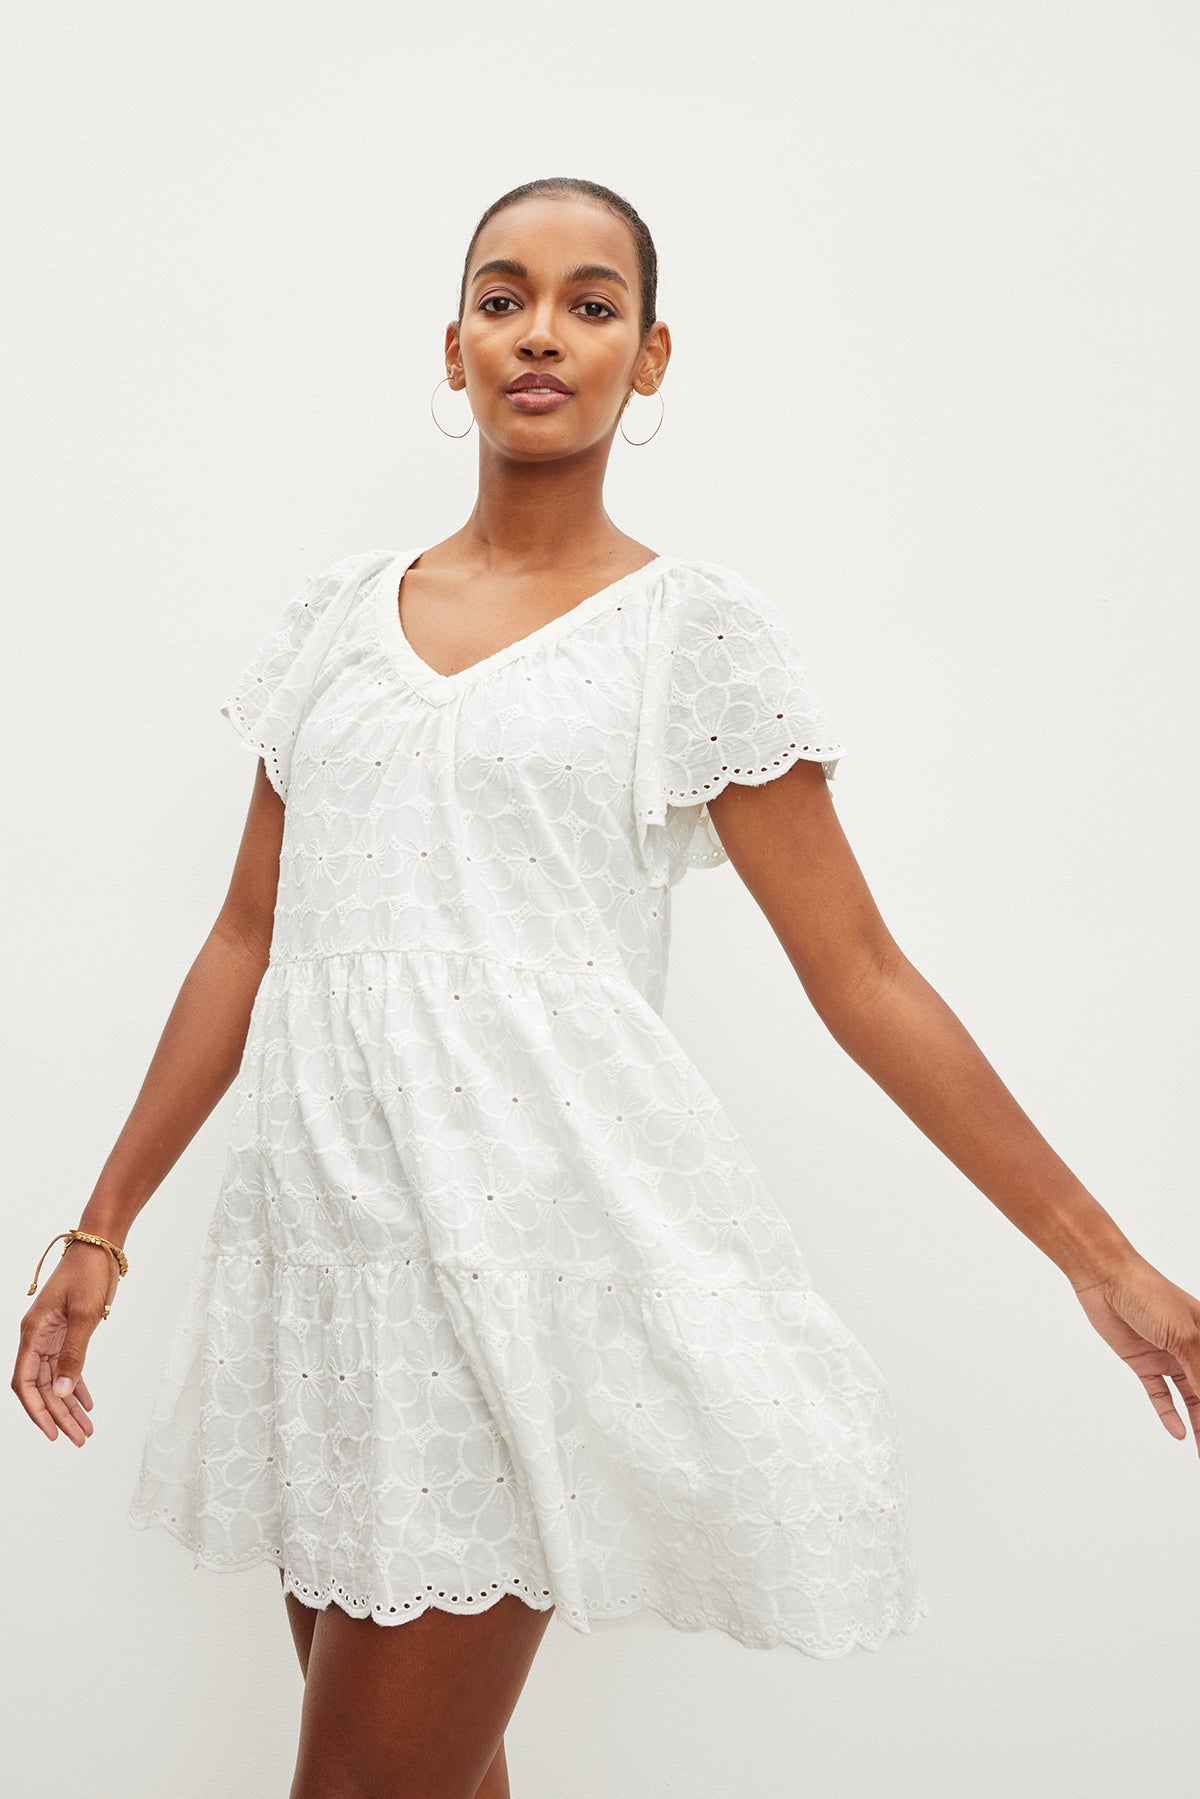   The model is wearing a white embroidered WYNETTE EMBROIDERED COTTON dress by Velvet by Graham & Spencer. 